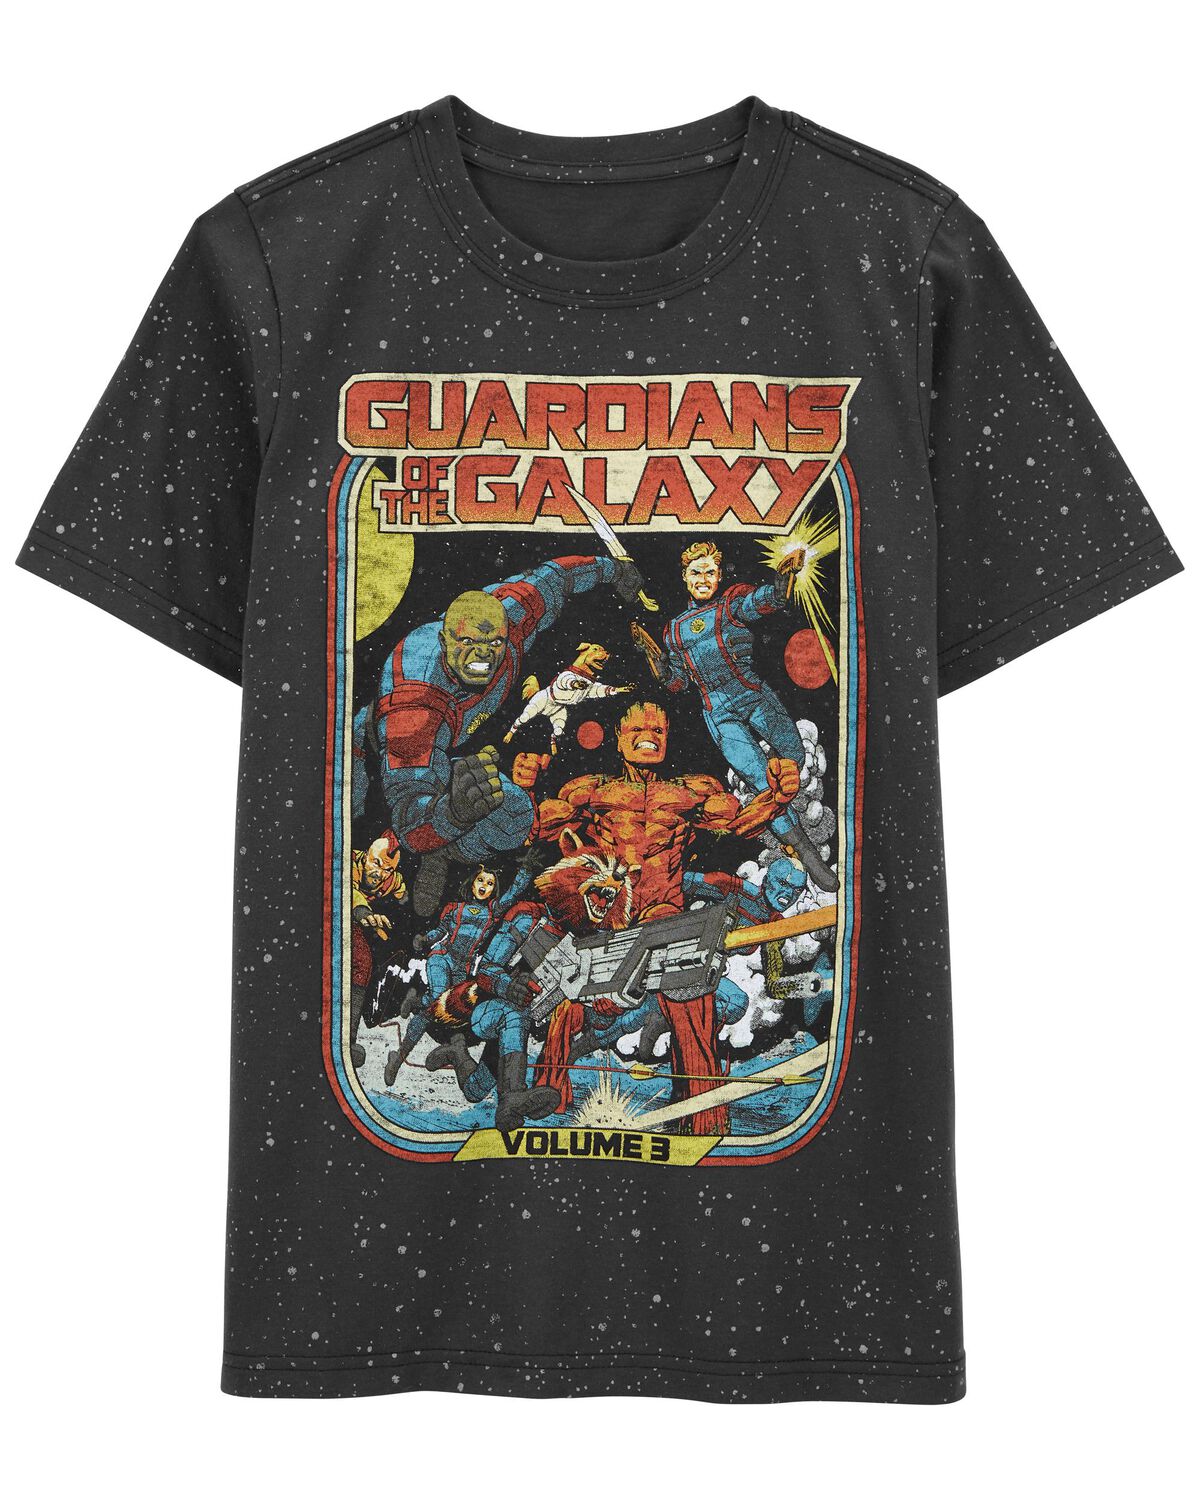 Kid Guardians Of The Galaxy Graphic Tee